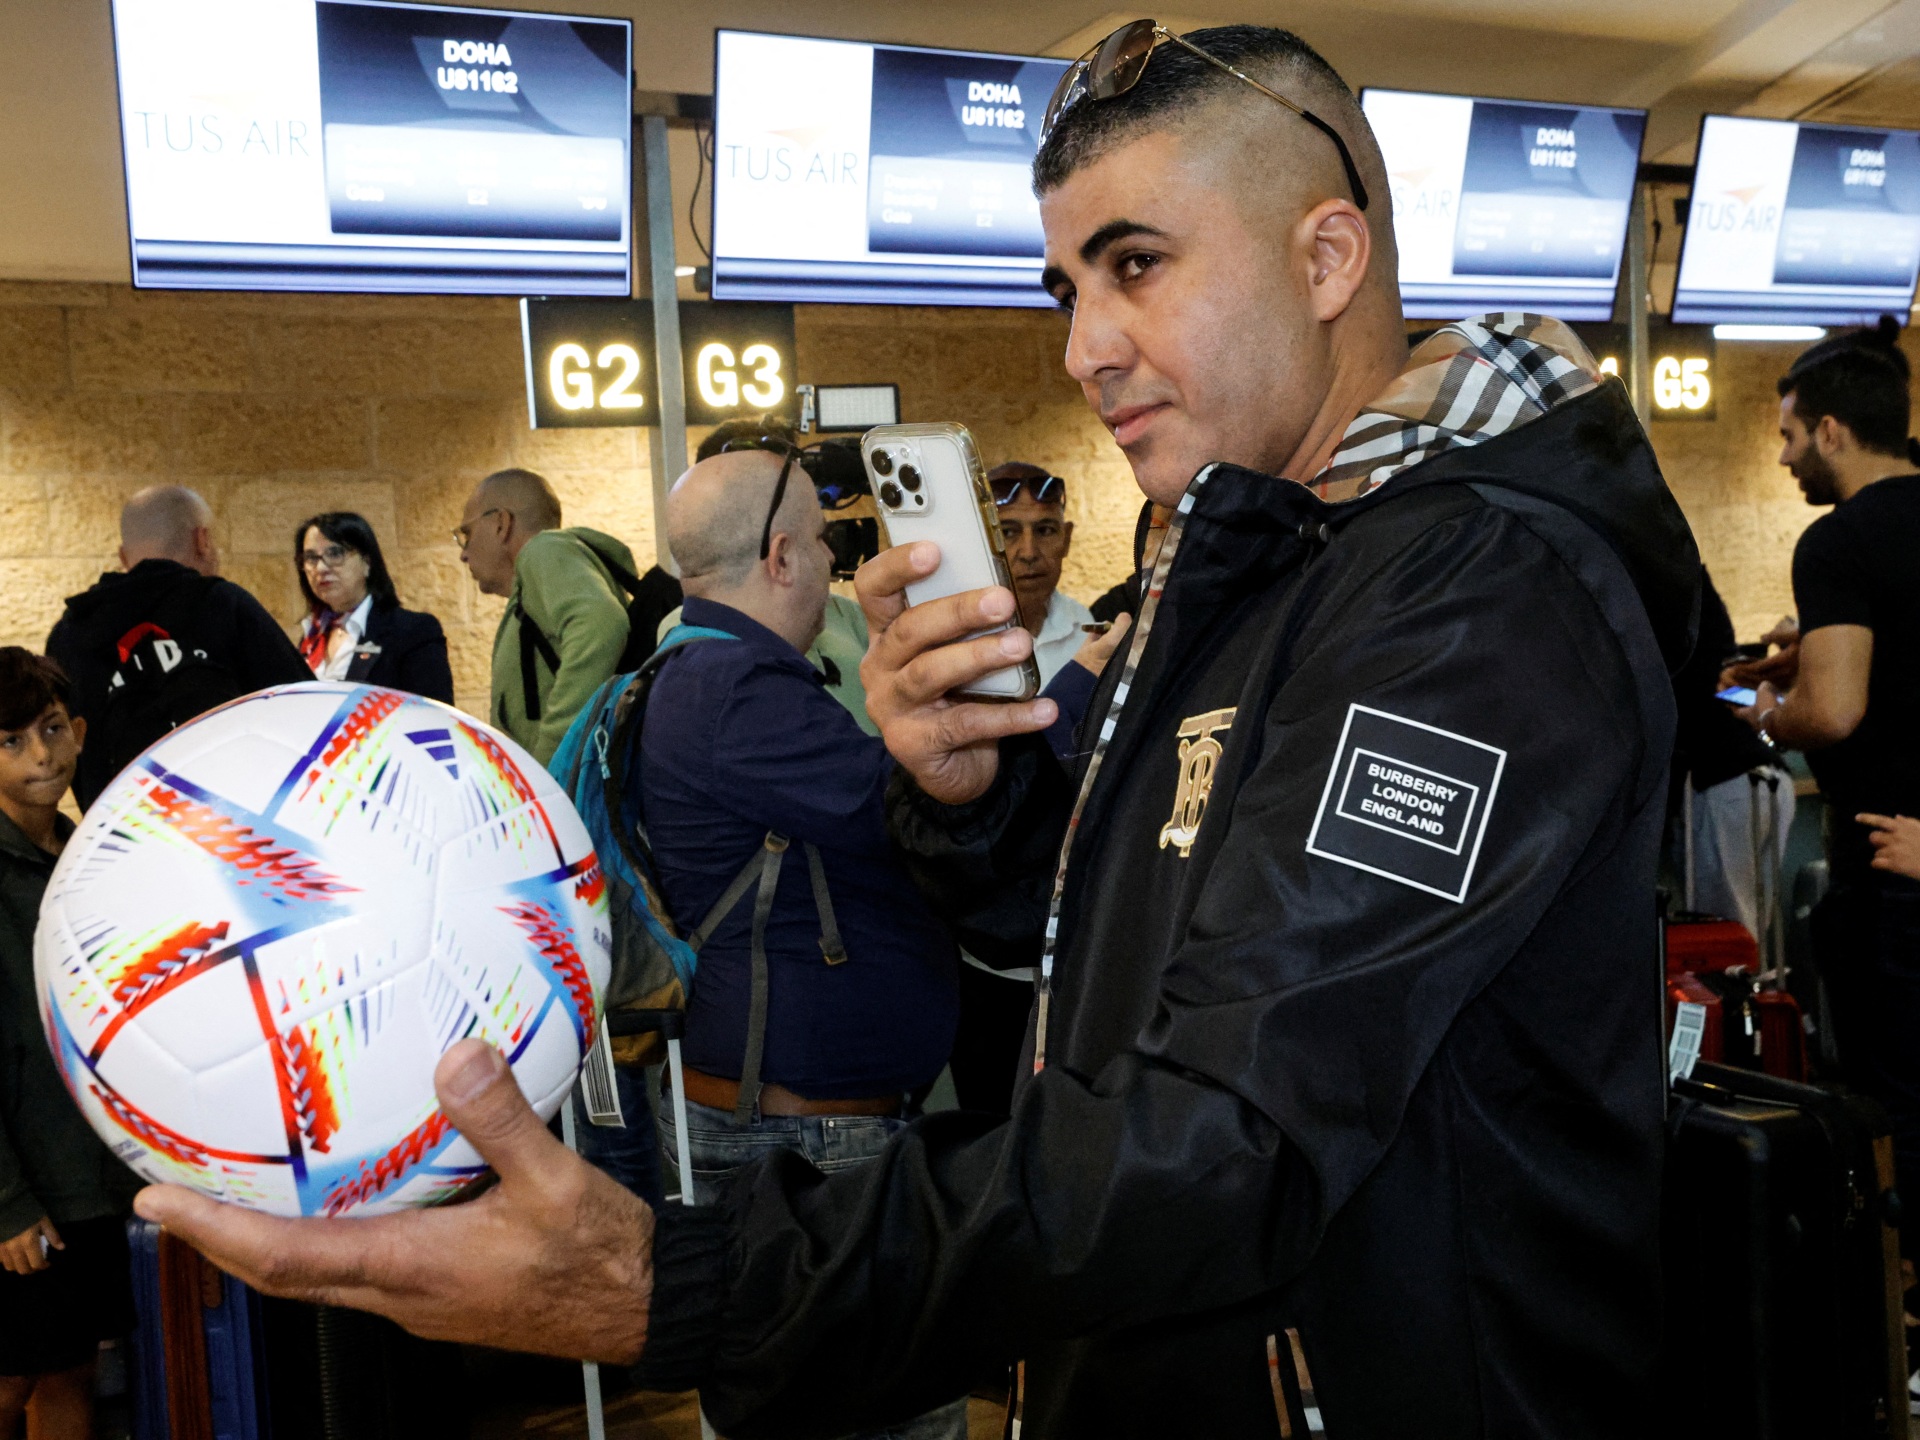 First direct Tel Aviv to Doha flight brings fans to World Cup